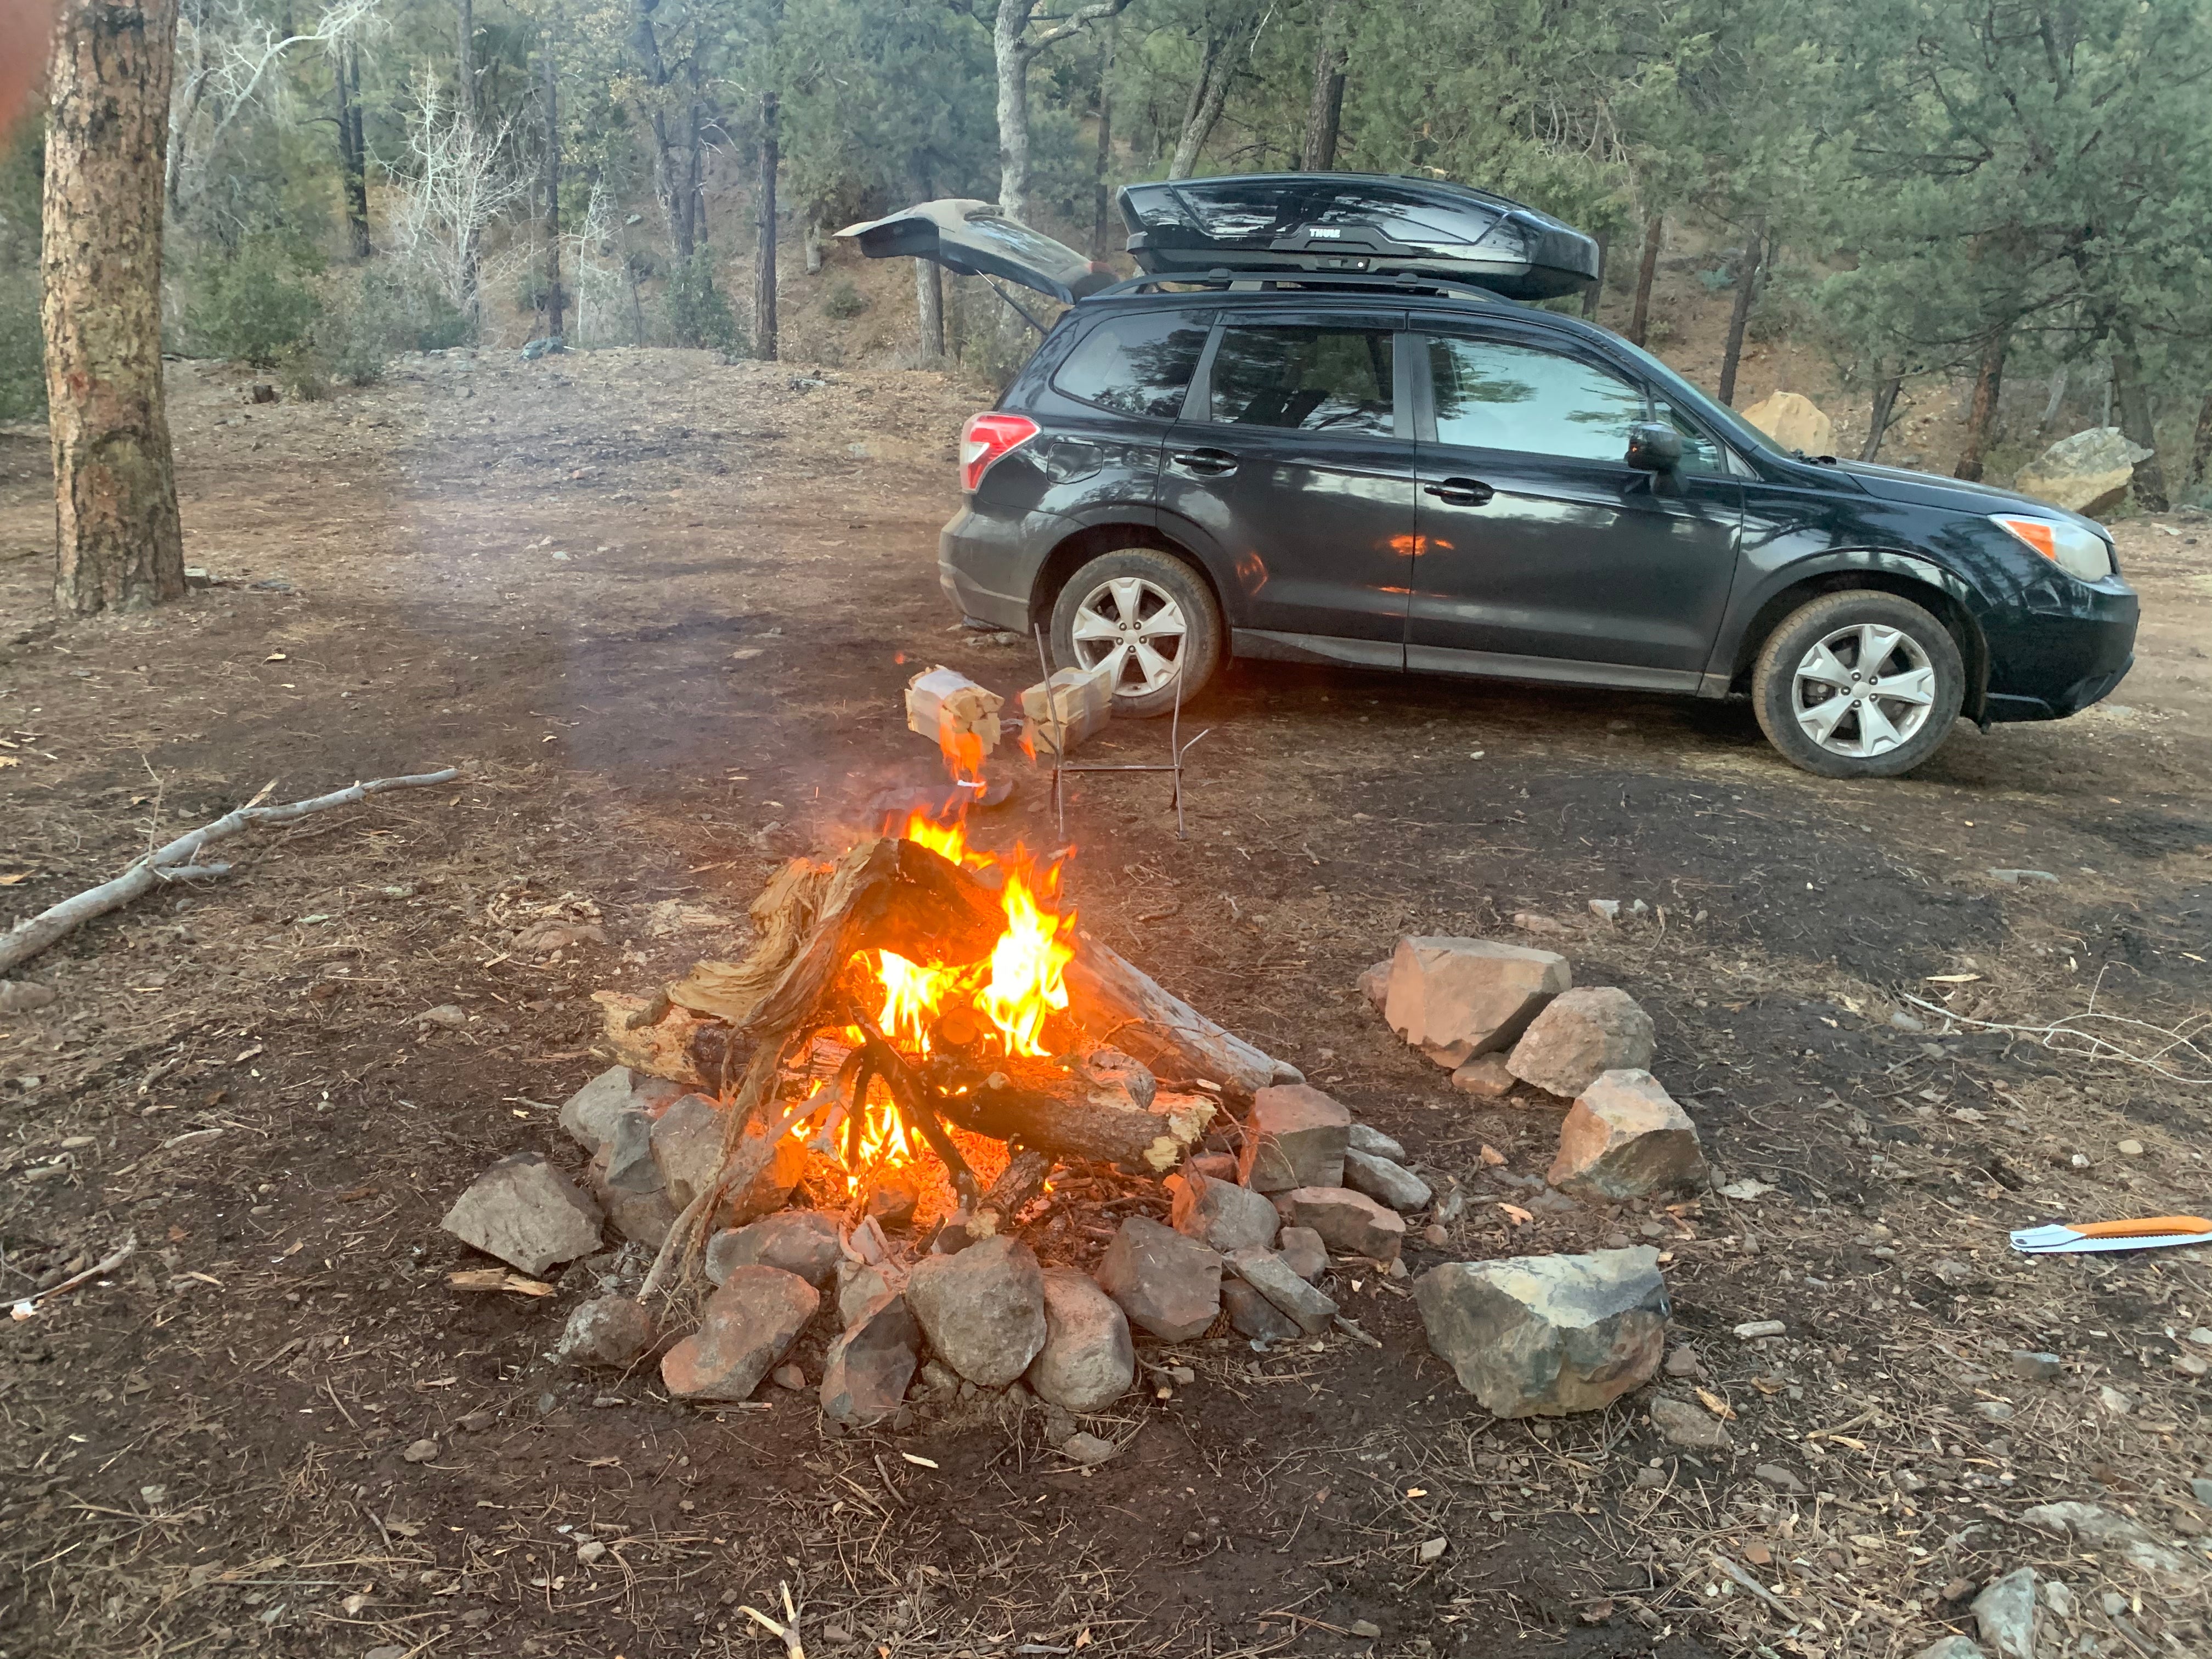 Camper submitted image from Prescott Basin Dispersed Camping - 2